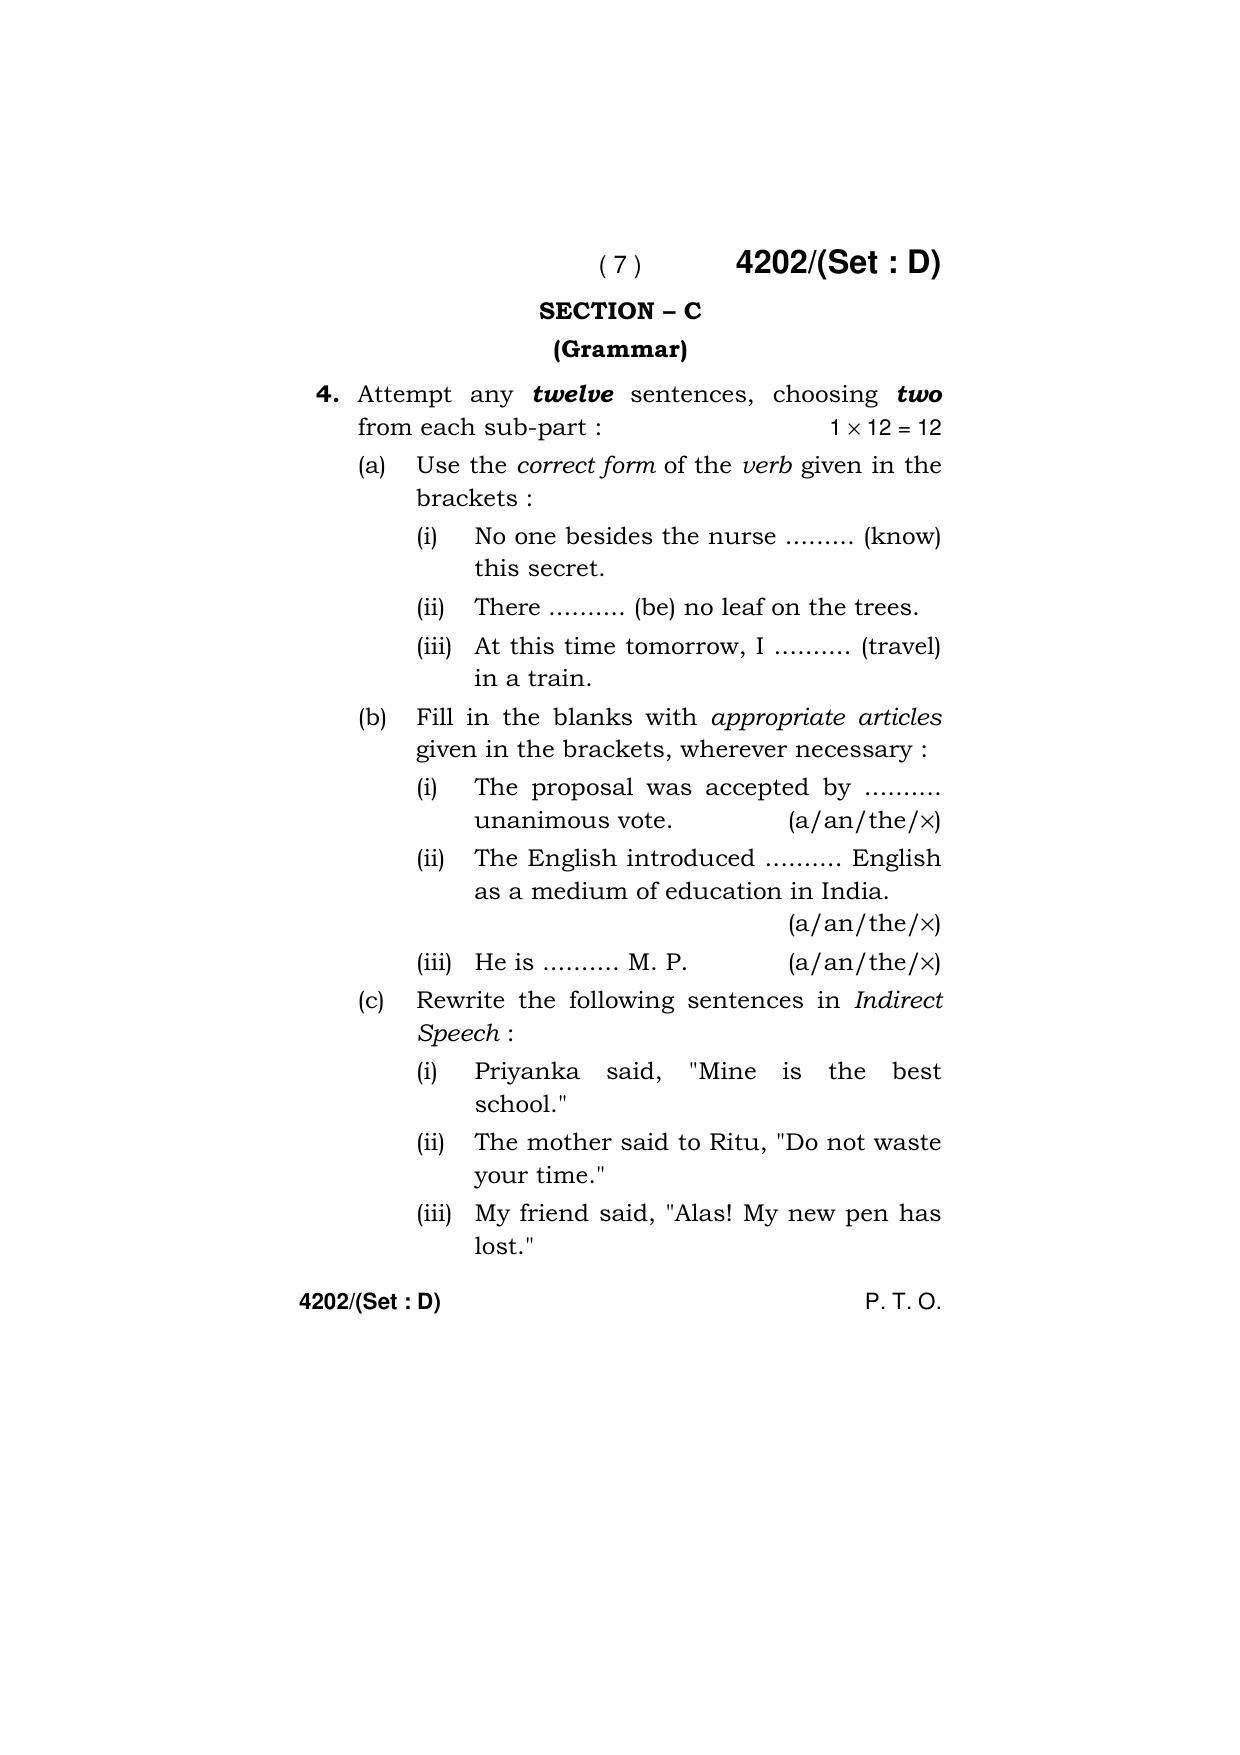 Haryana Board HBSE Class 10 English (All Set) 2019 Question Paper - Page 55